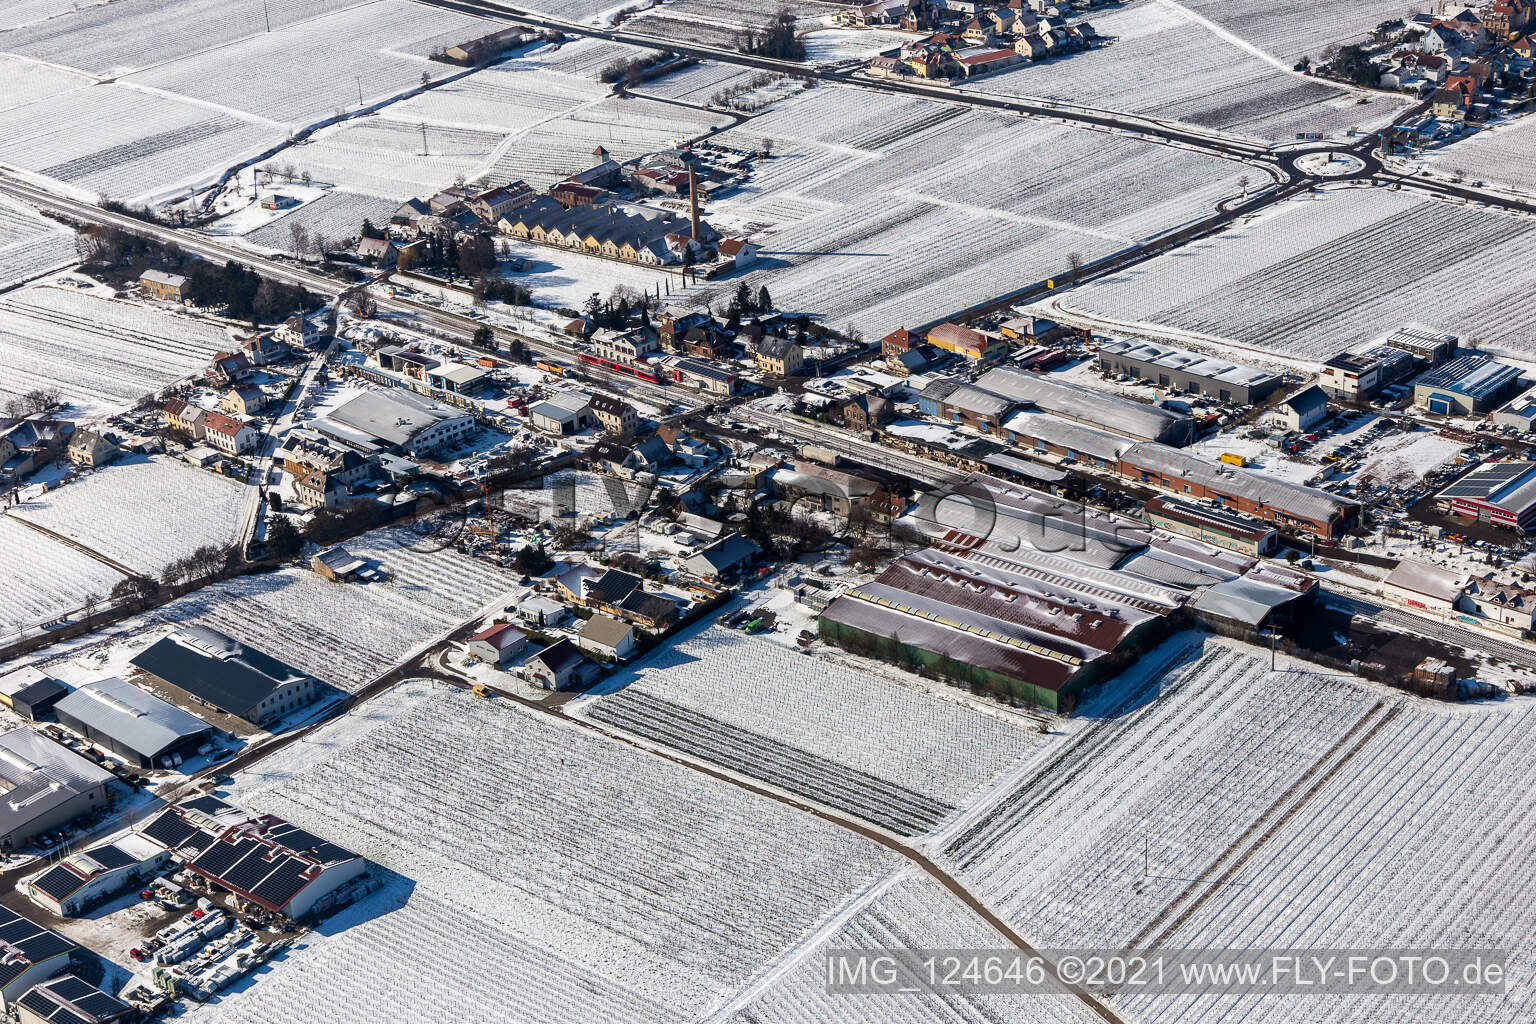 Aerial view of Winter aerial view in the snow industrial area Bordmühle in Kirrweiler in the state Rhineland-Palatinate, Germany